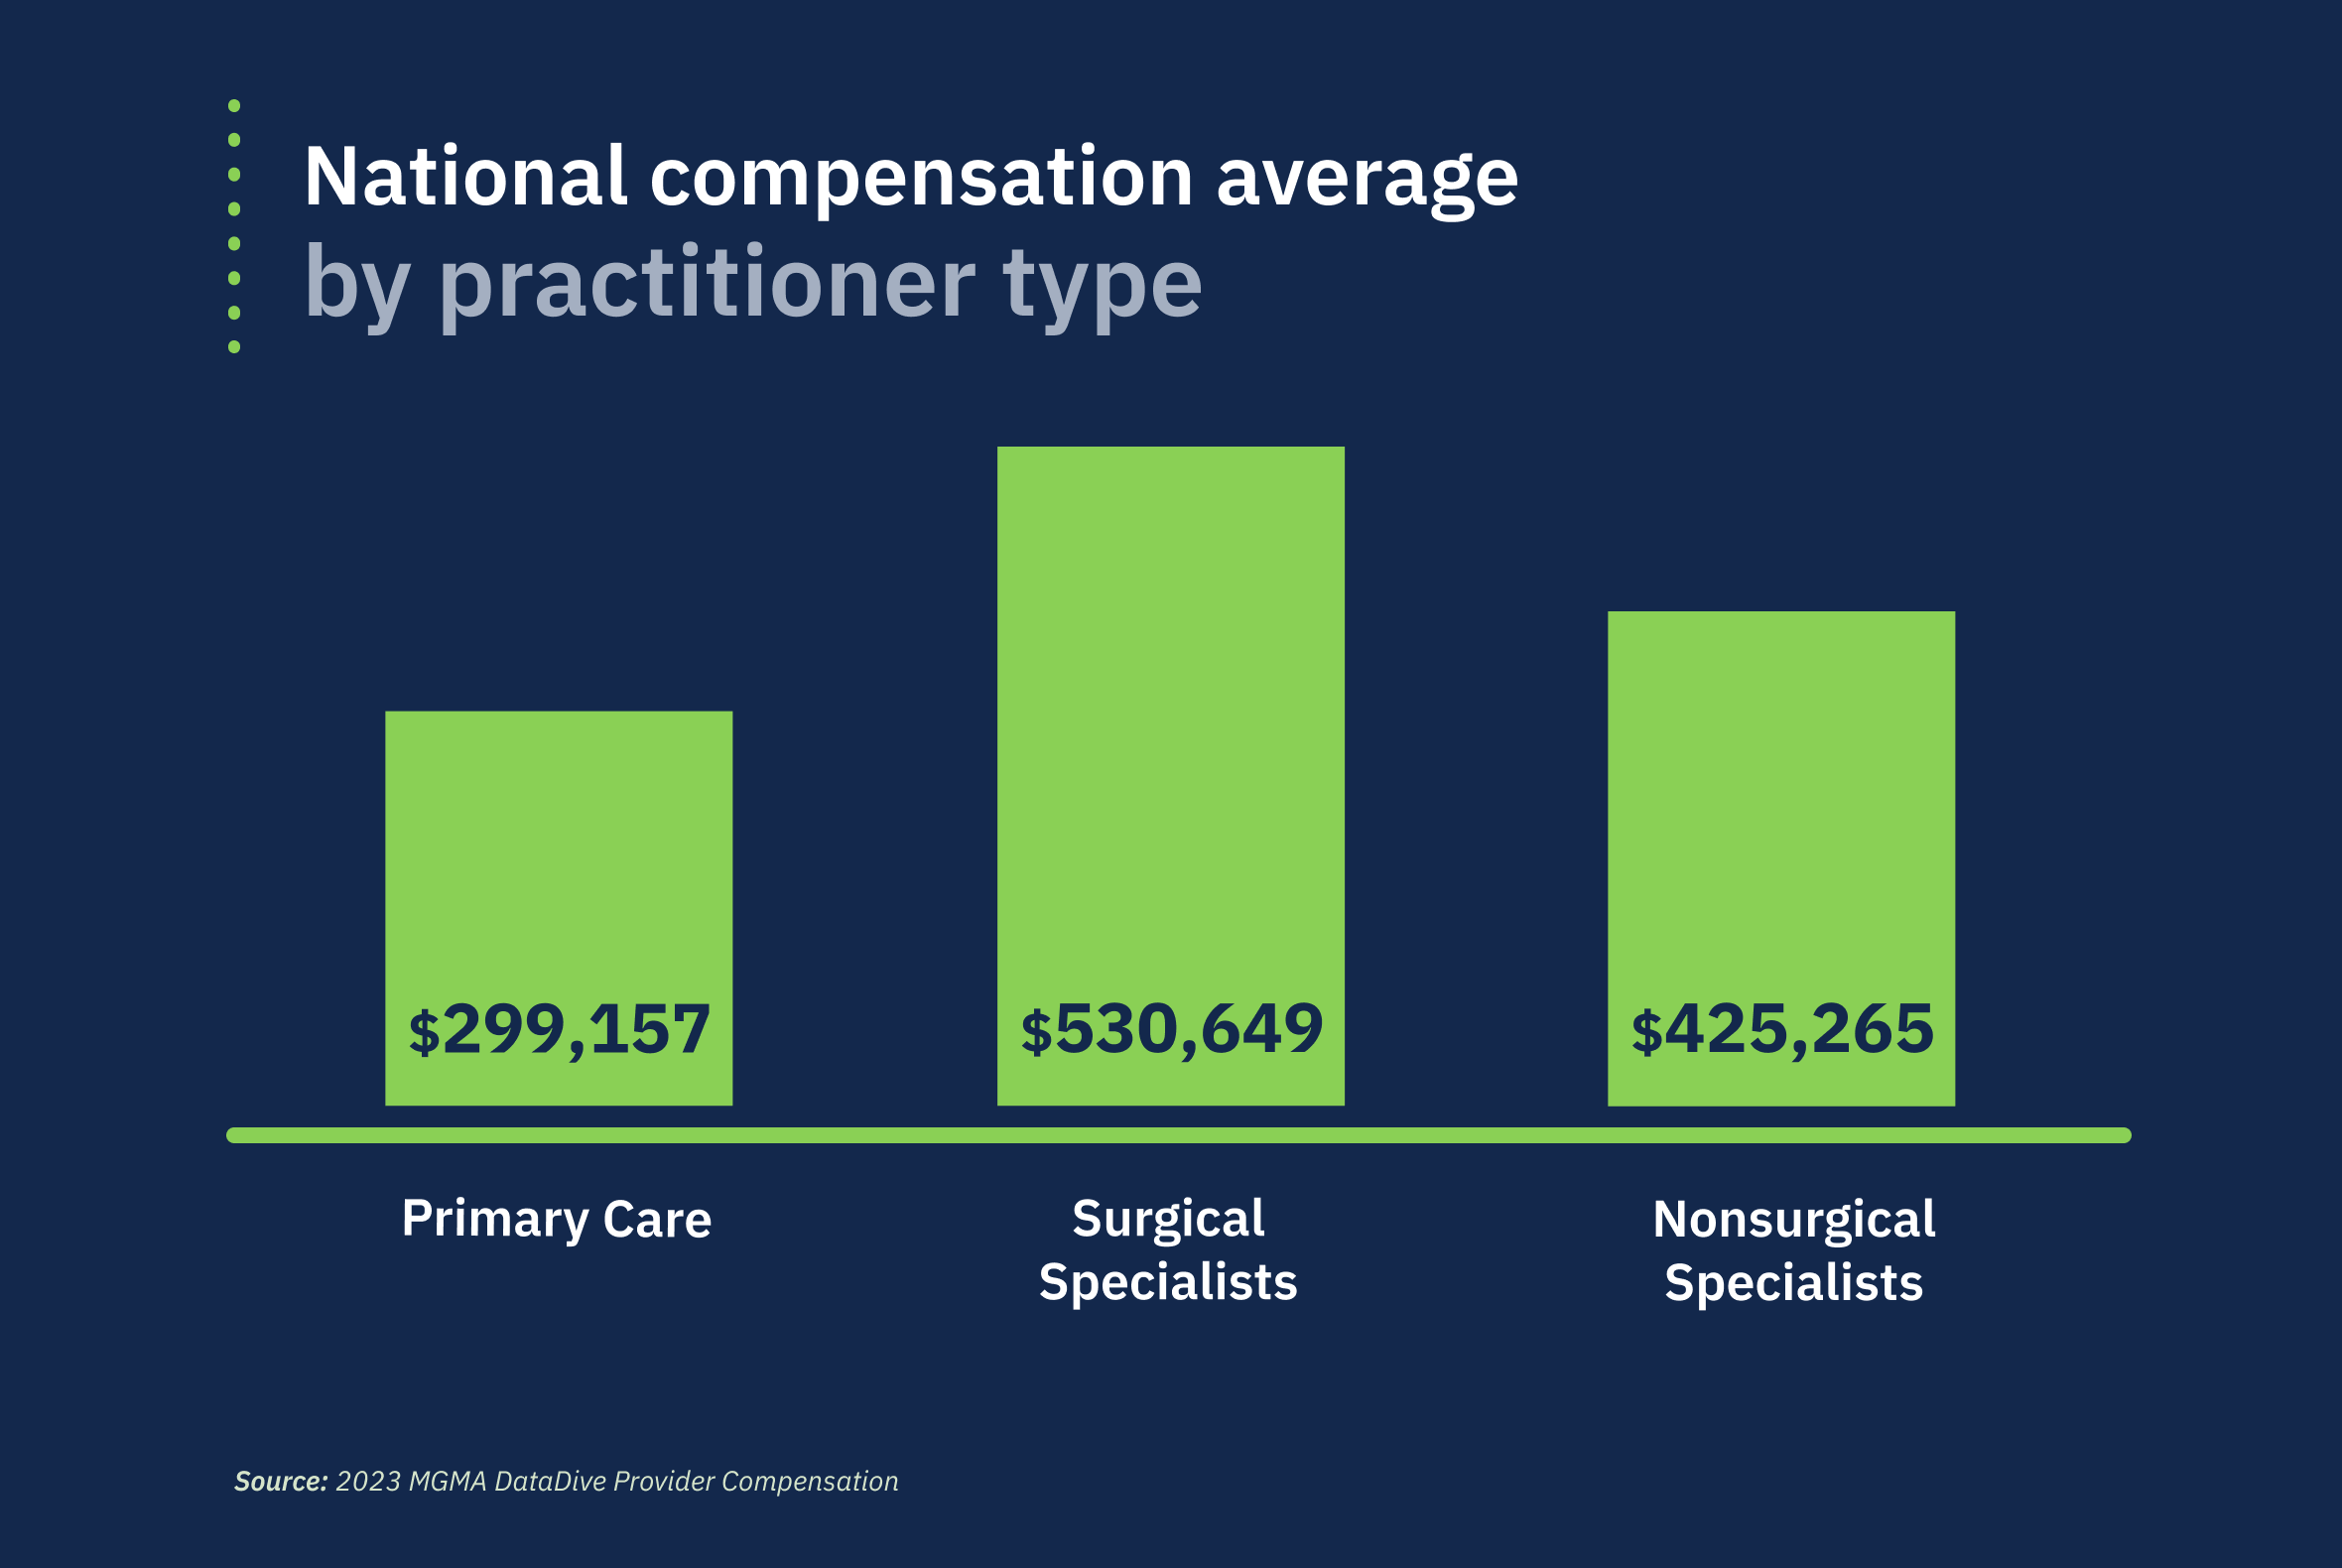 Graphic #2: National compensation average by practitioner type